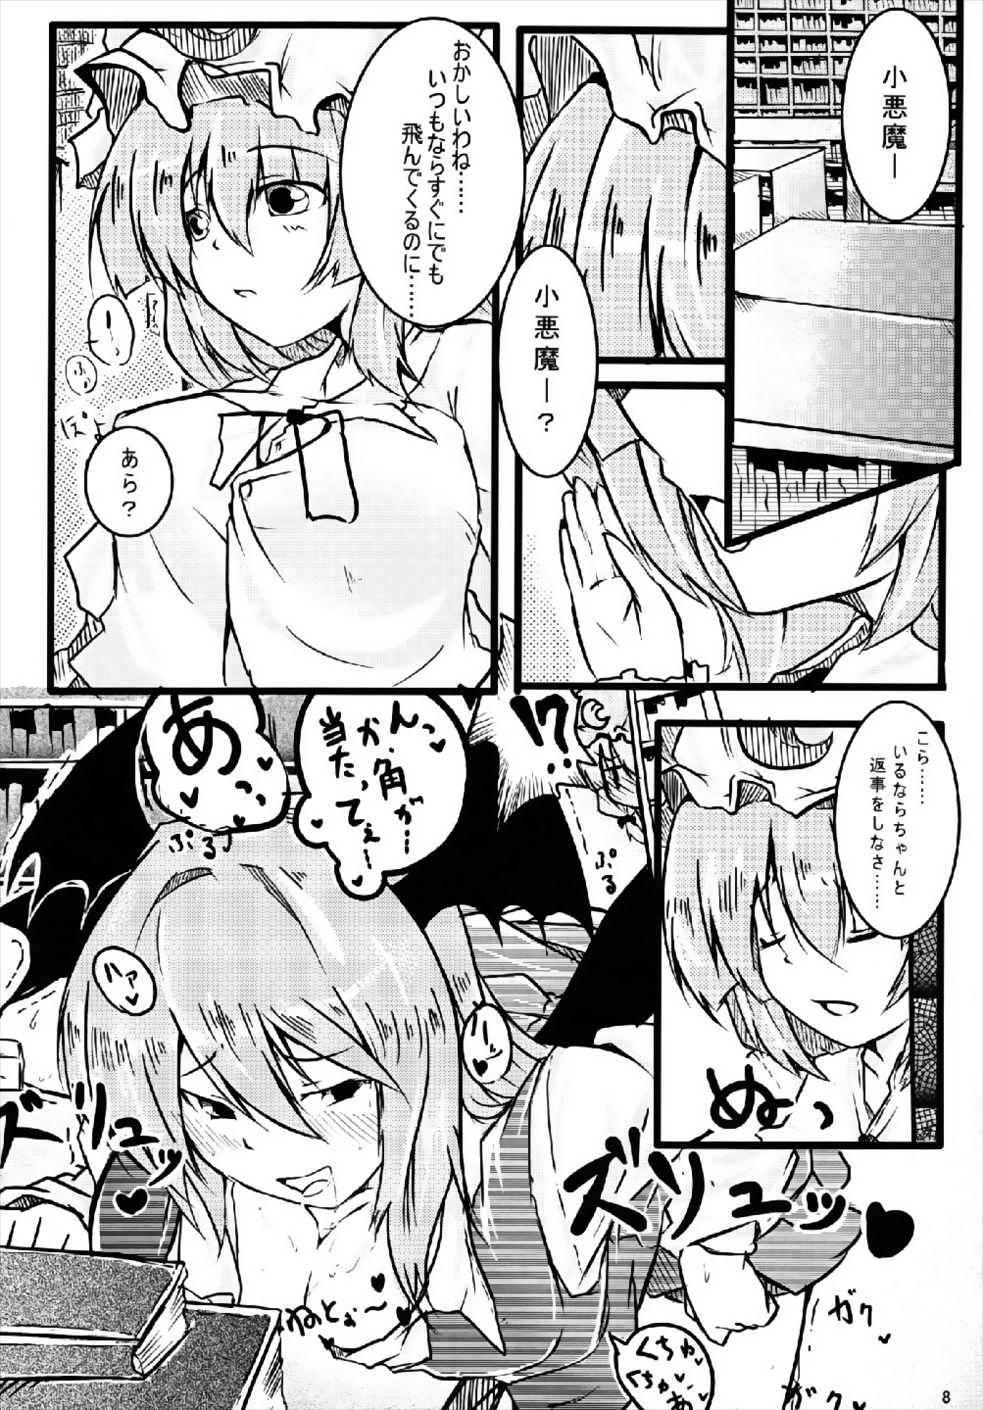 Hard Core Porn RemiFlaPatche! - Touhou project Gay Party - Page 7